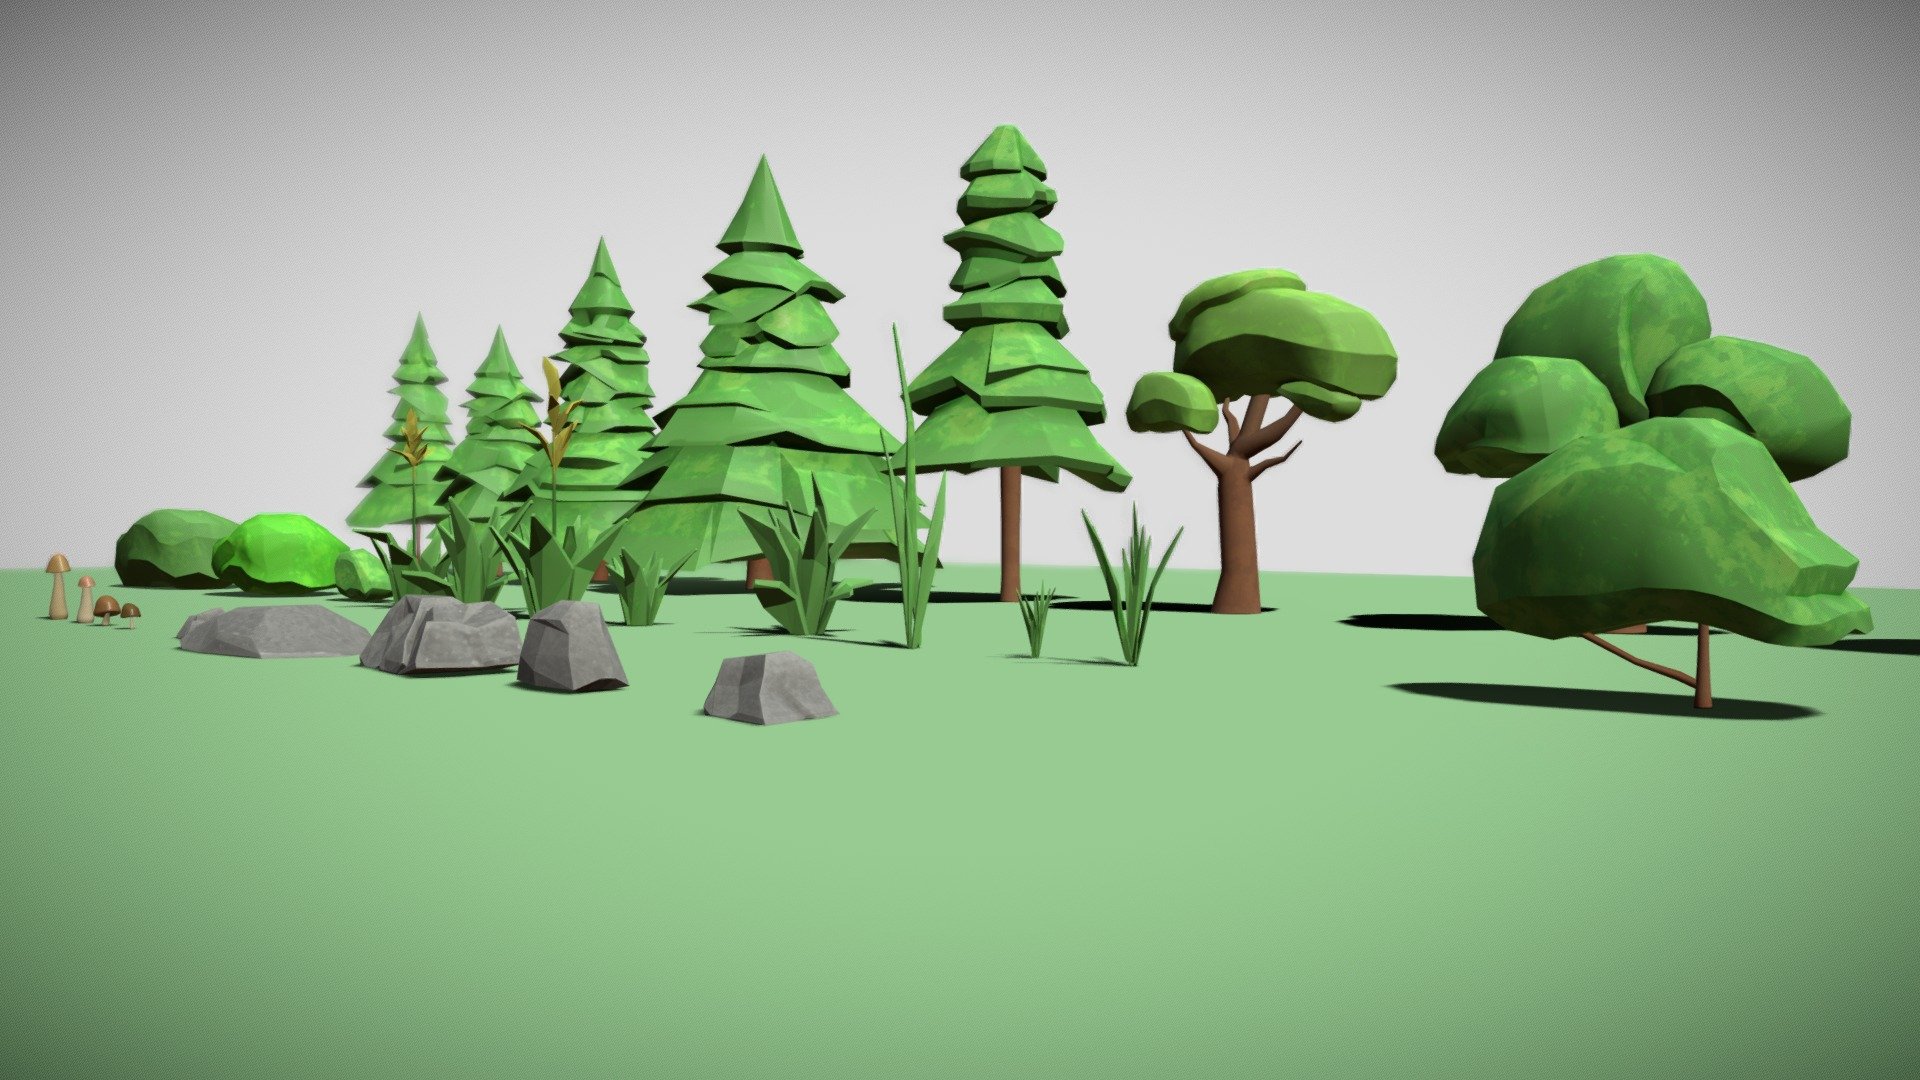 This pack contains 32 Game ready lowpoly Models:

5 Pine Trees 4 Trees 2 Small Trees 3 Bushes 8 Plants 4 Mushrooms 6 rocks

Total Tris: 20006

The package contains of glb, fbx, and obj format plus a Blender file with all the 3D models + Maya Files for each category/ Version 2023

Were tested and rendered in Unreal Engine.

Textures are 2048* 2048 but the image render with Unreal is with 1024 maps so you can also chnage the resolution based of your need.

If you need more info feel free to contact me :) - 32 Stylized Plants package Low-poly 3D model - Buy Royalty Free 3D model by RaziehKooshki 3d model